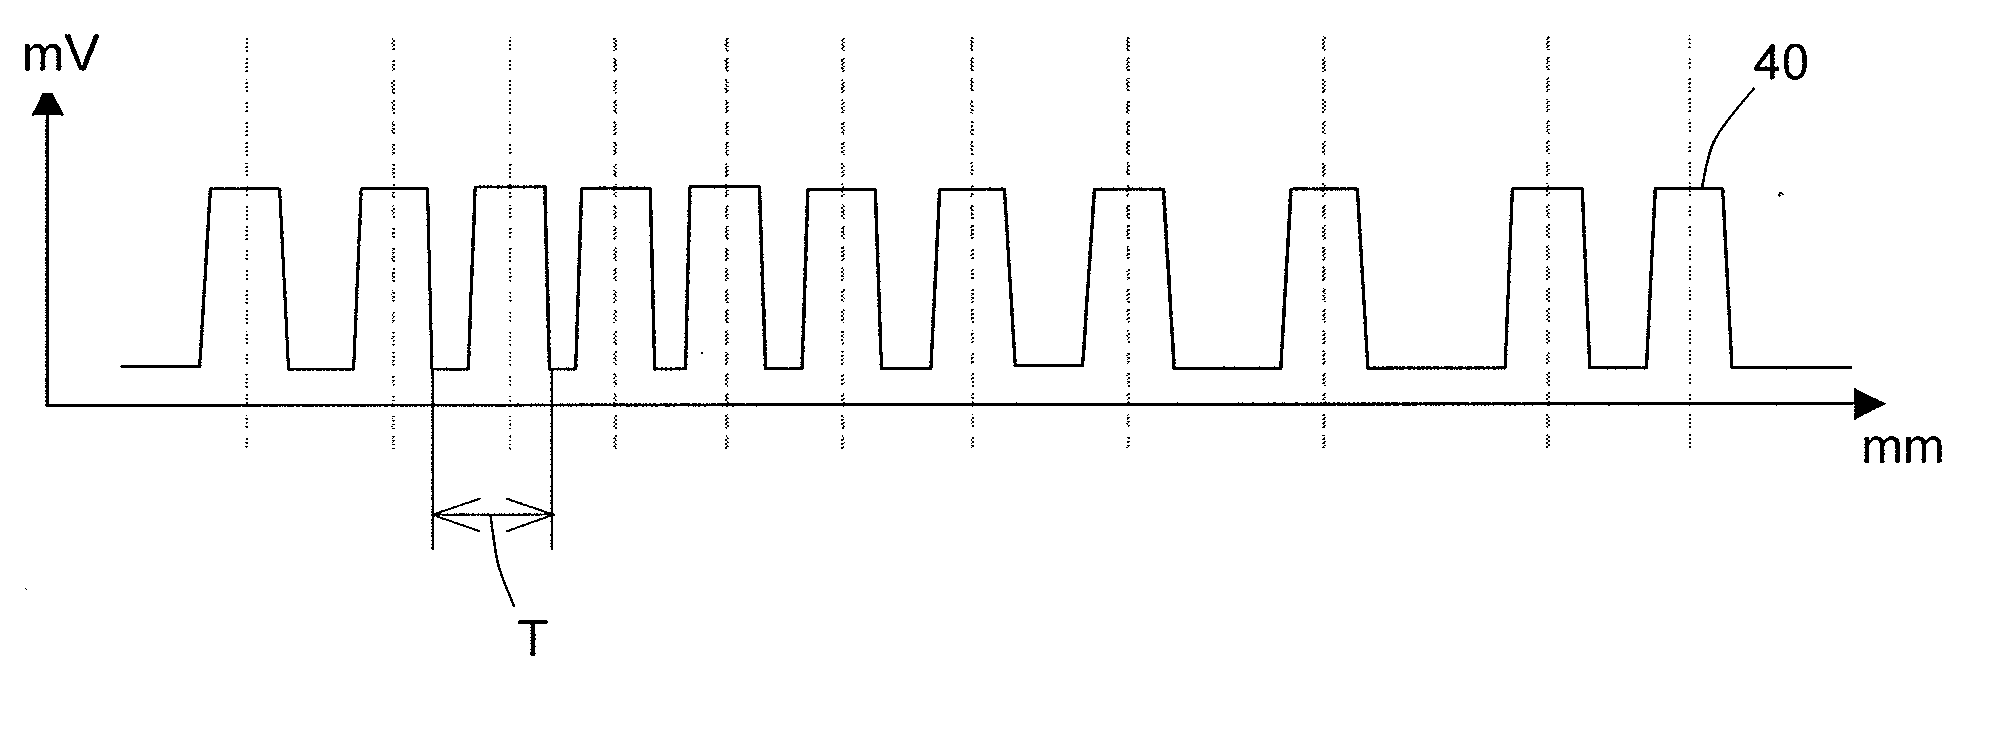 Topography device for a surface of a substrate